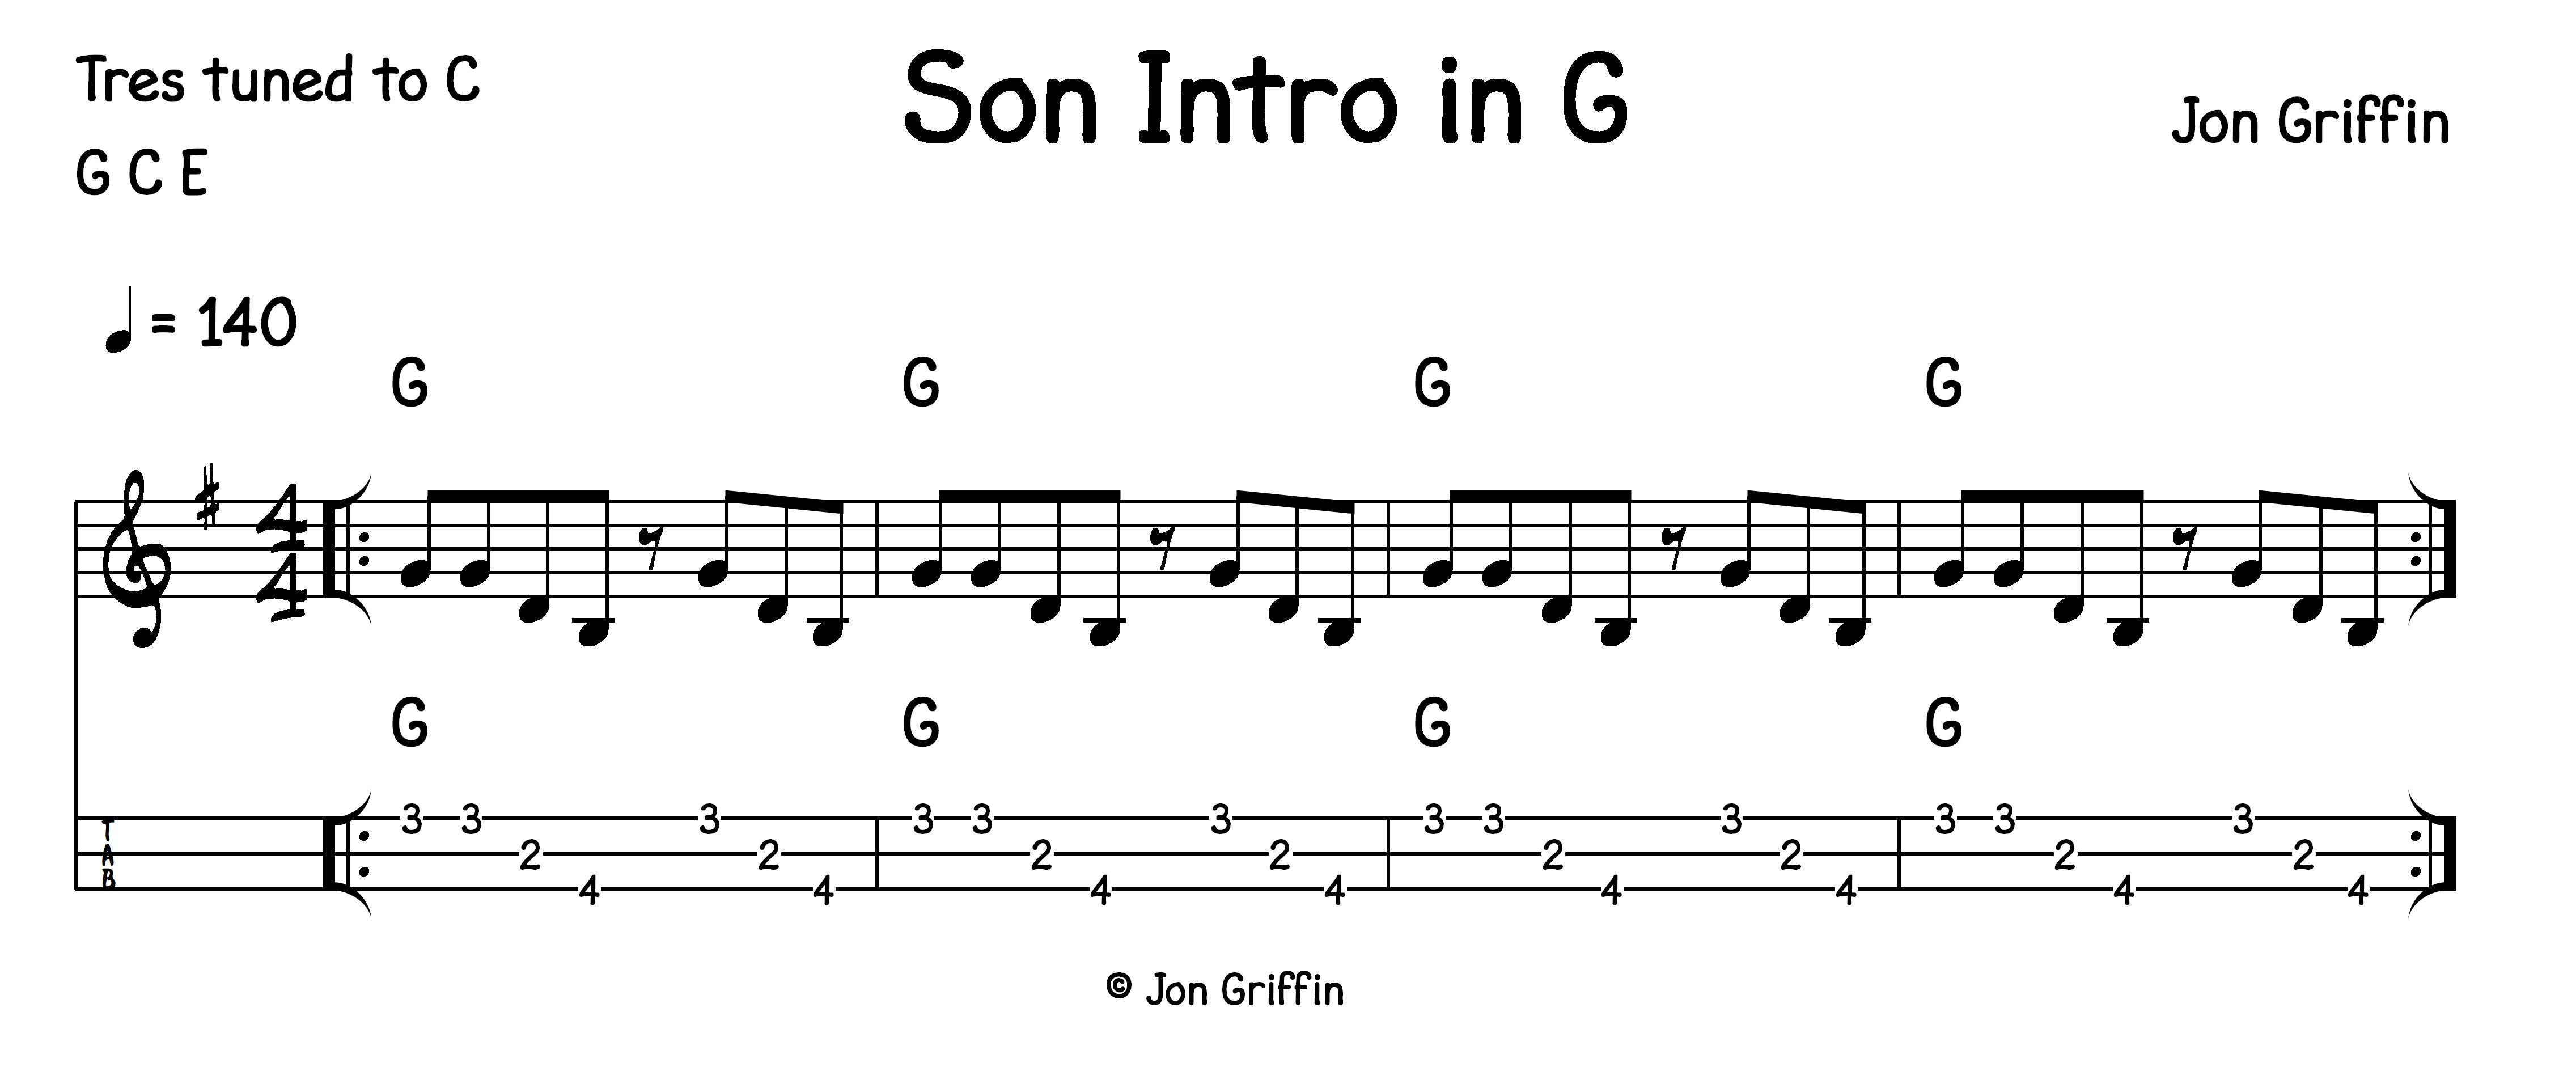 Son Intro in G notaion example